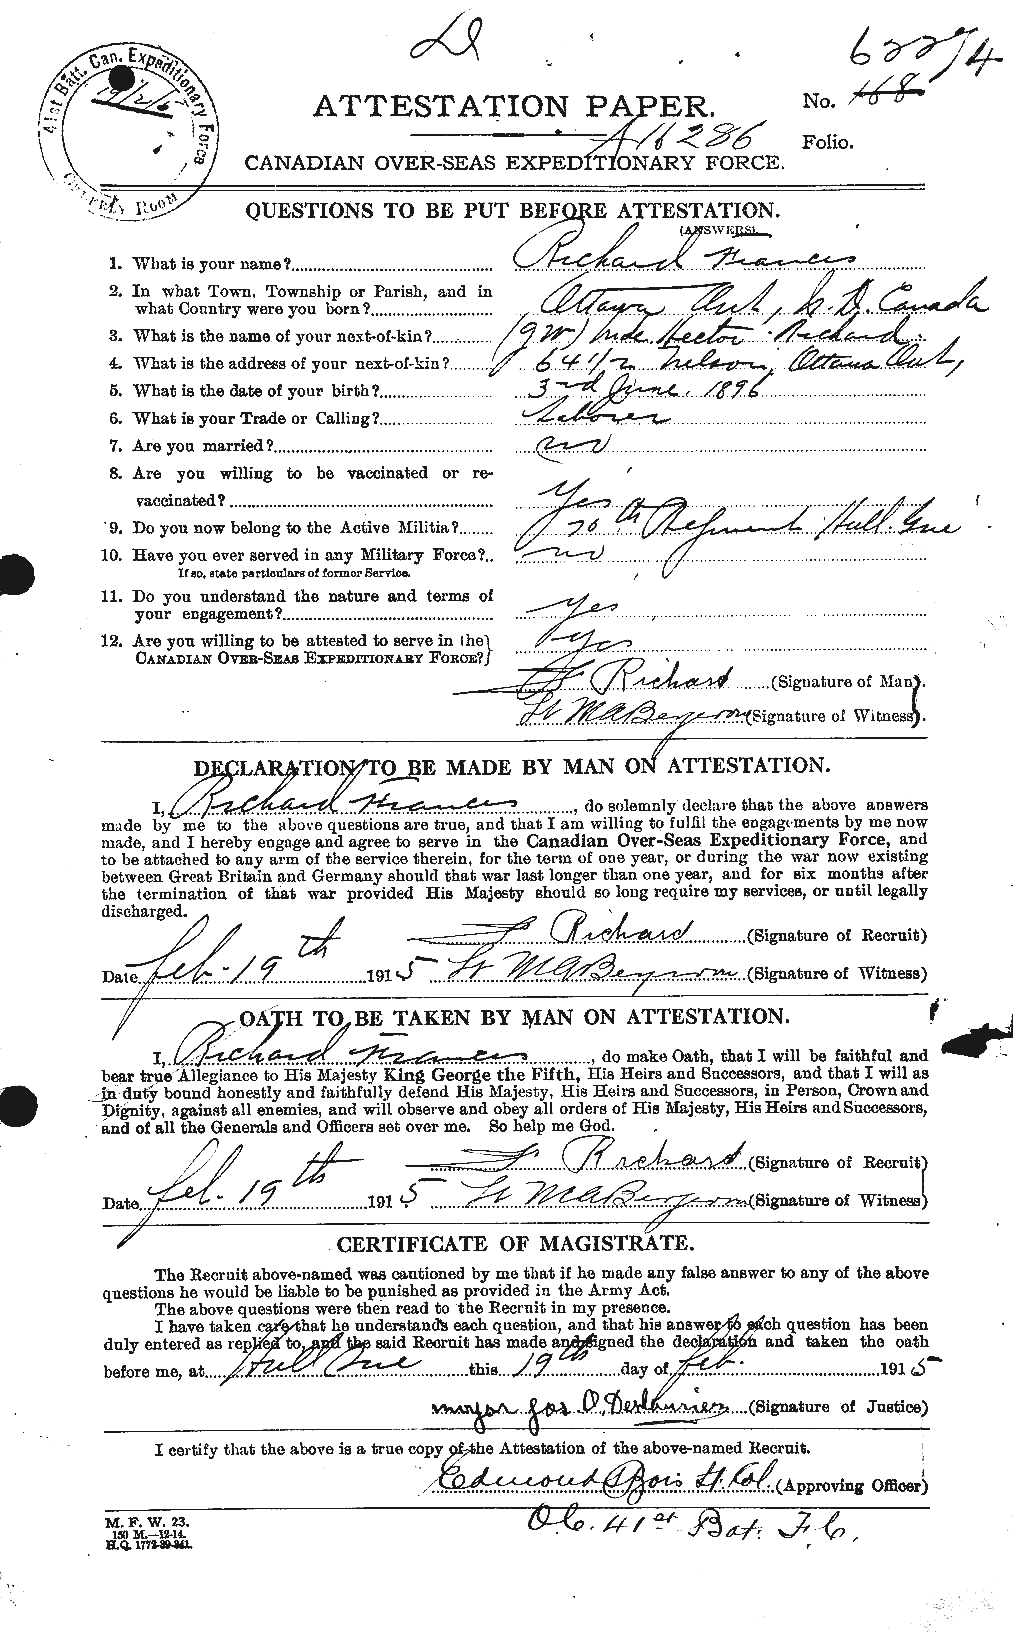 Personnel Records of the First World War - CEF 639046a